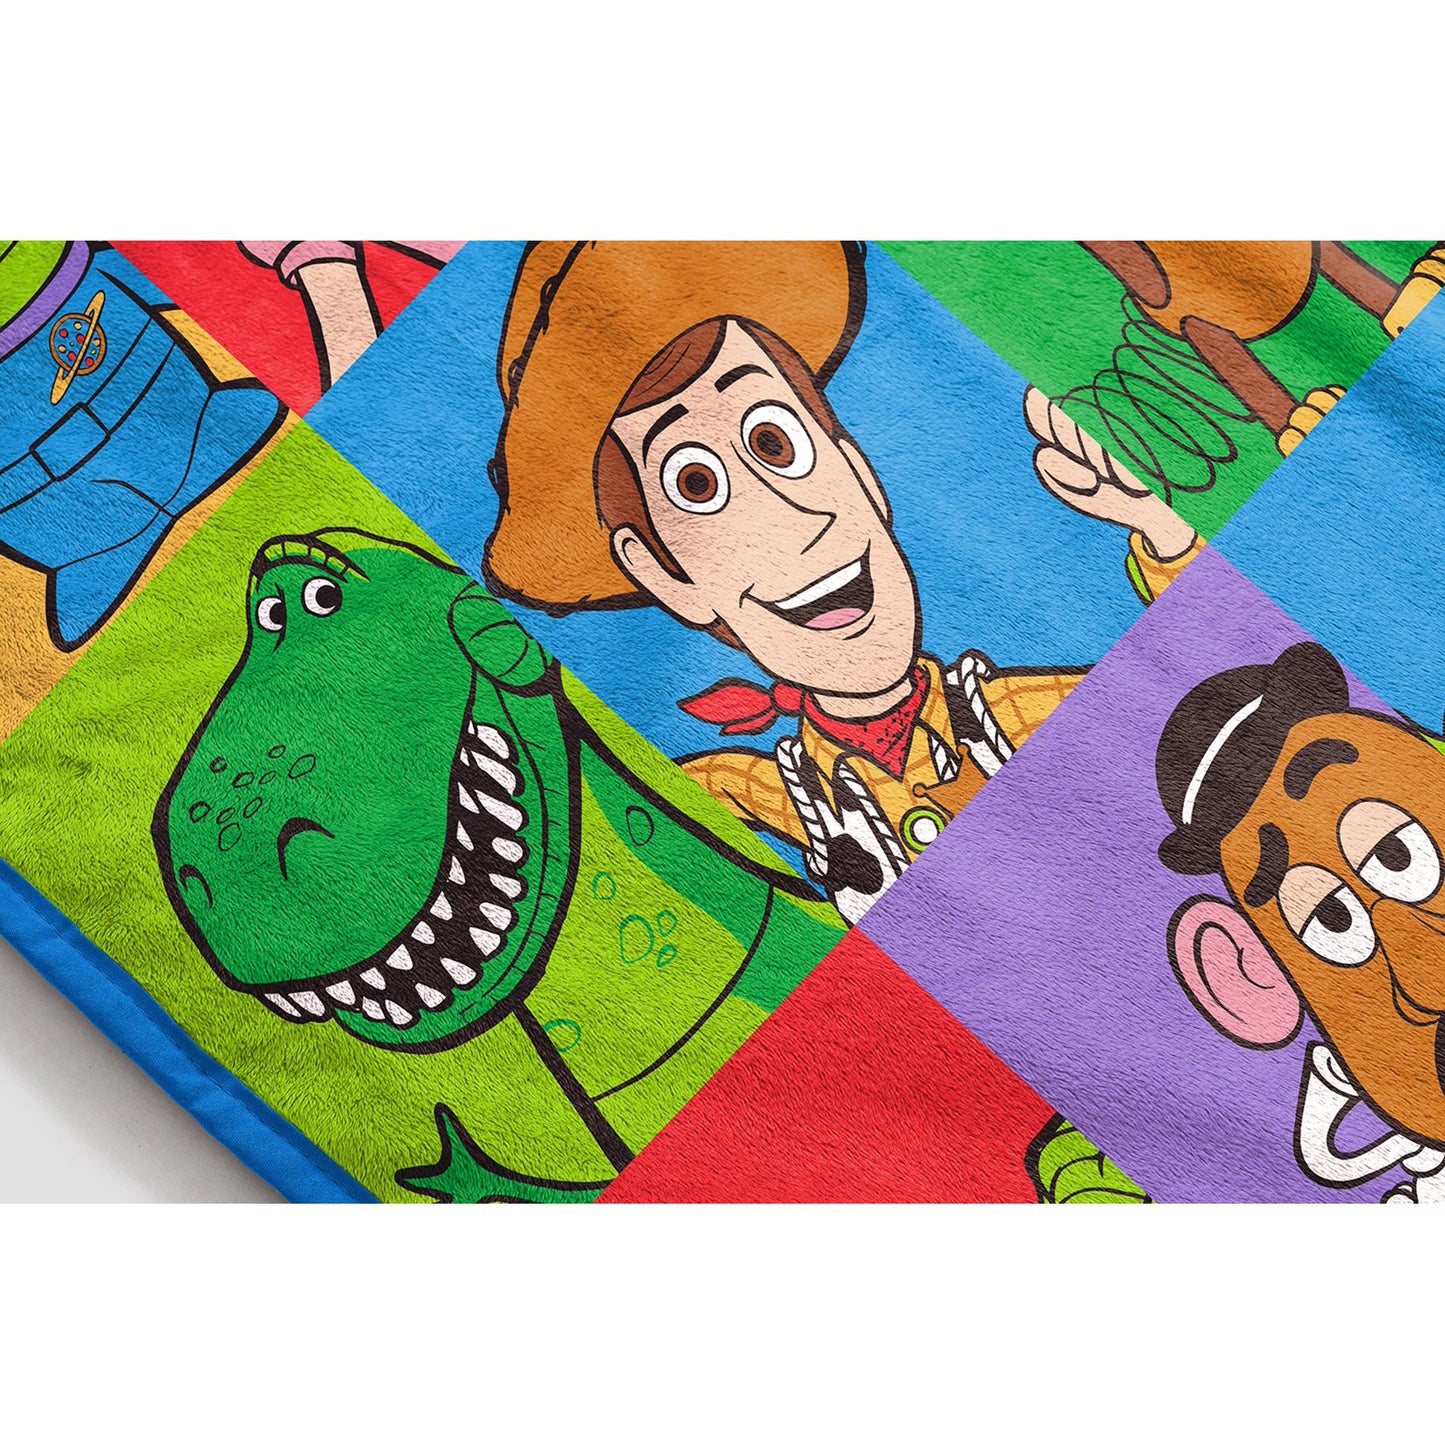 TOY STORY Kids' Plush Throw Blanket (Pack of 3)